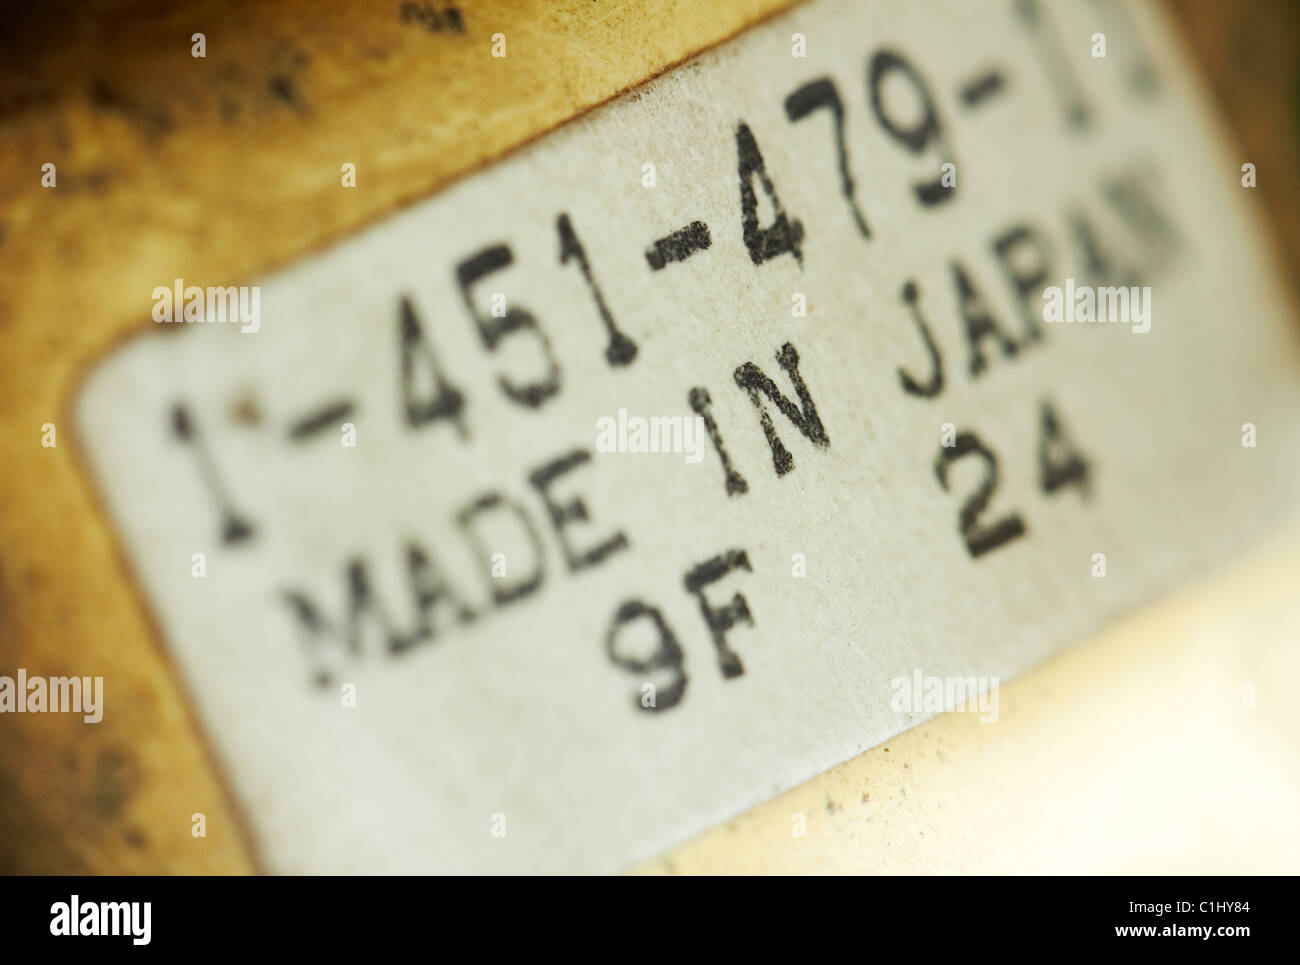 Macro of a label sticker, dusted. Stock Photo